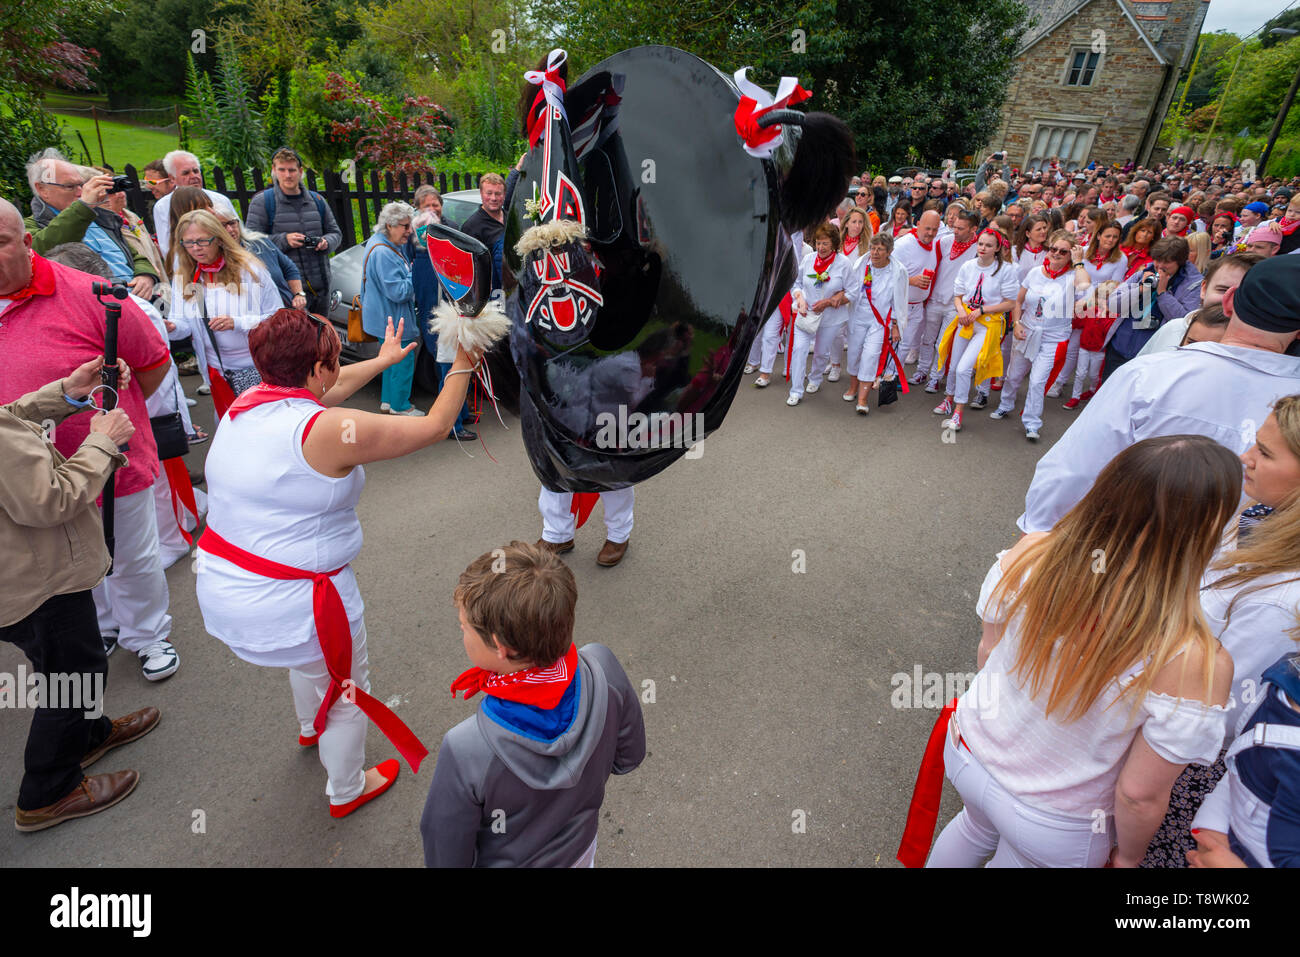 Editorial: Unknow members of the public and potential logos and signage. Padstow, Cornwall. 01/05/2019, The Obby Oss parade is a centuries old tradtio Stock Photo